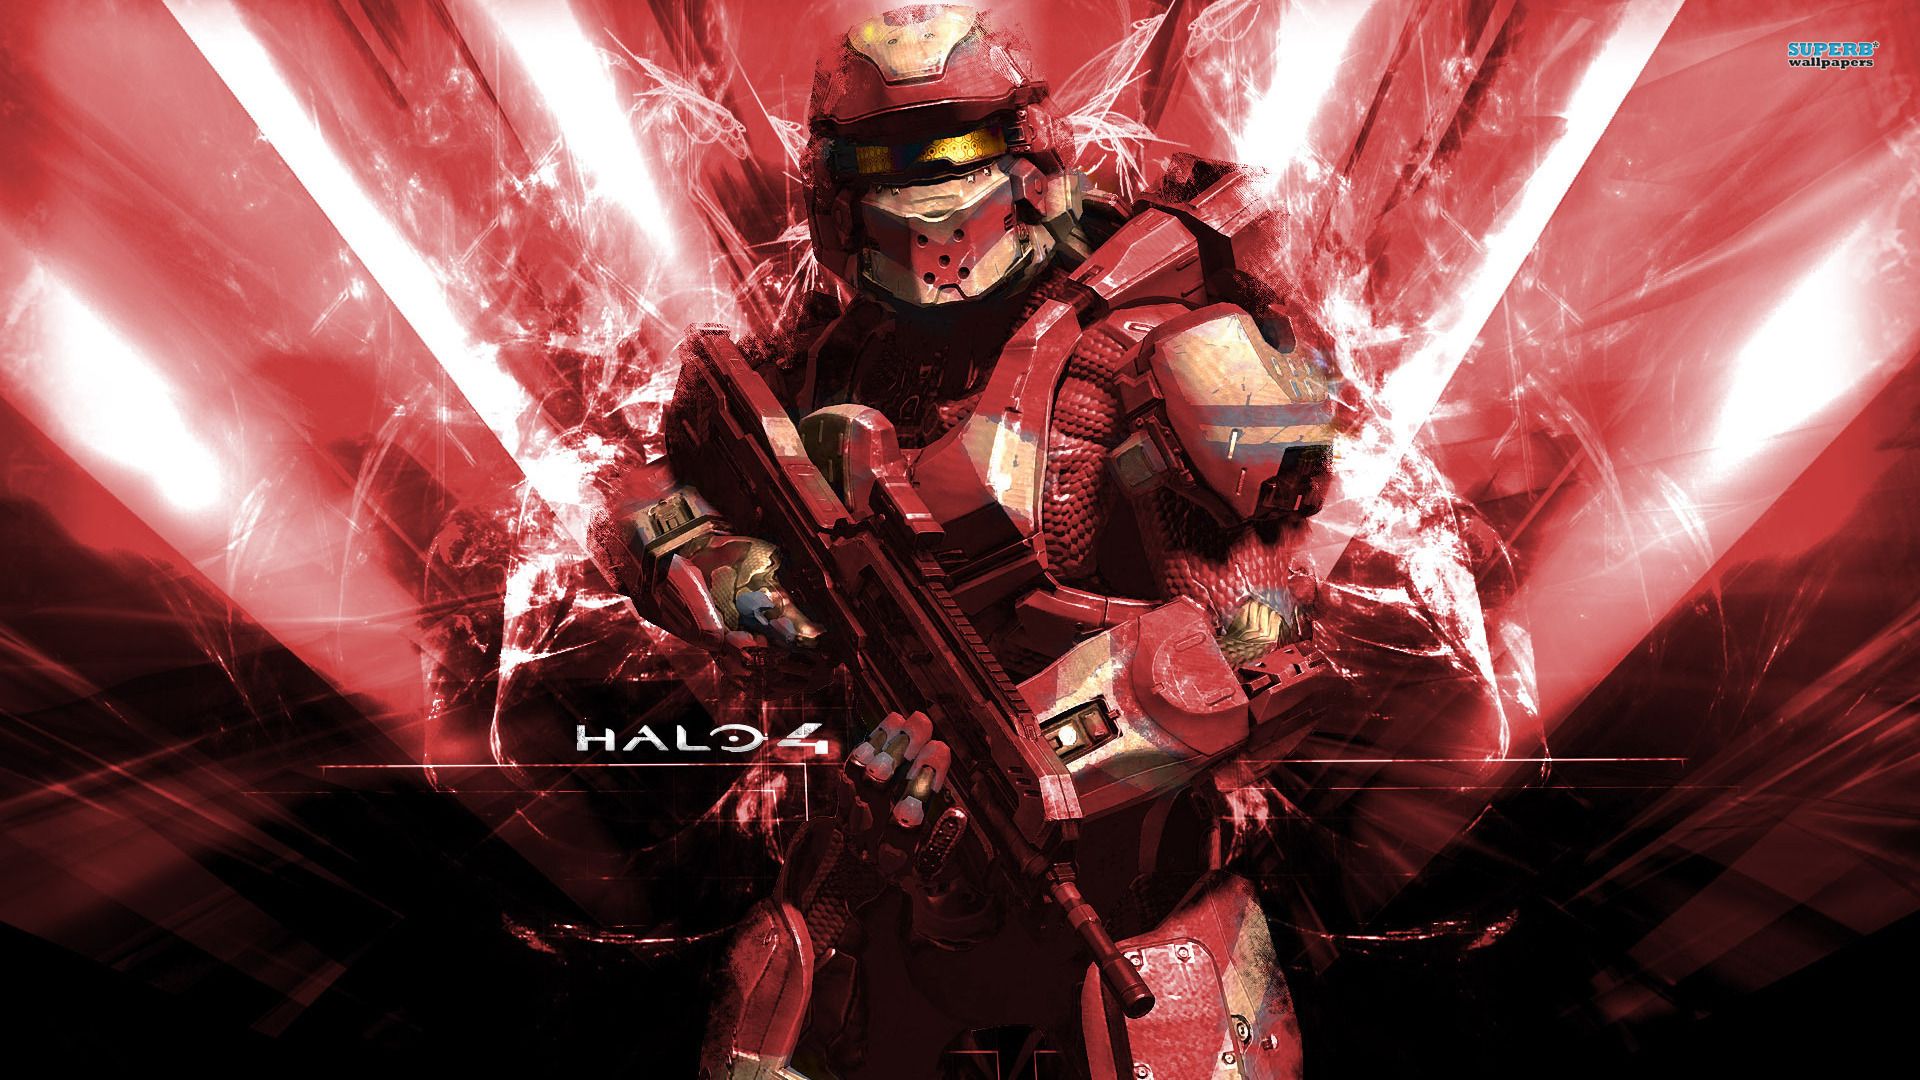 Halo 4 wallpaper - Game wallpapers